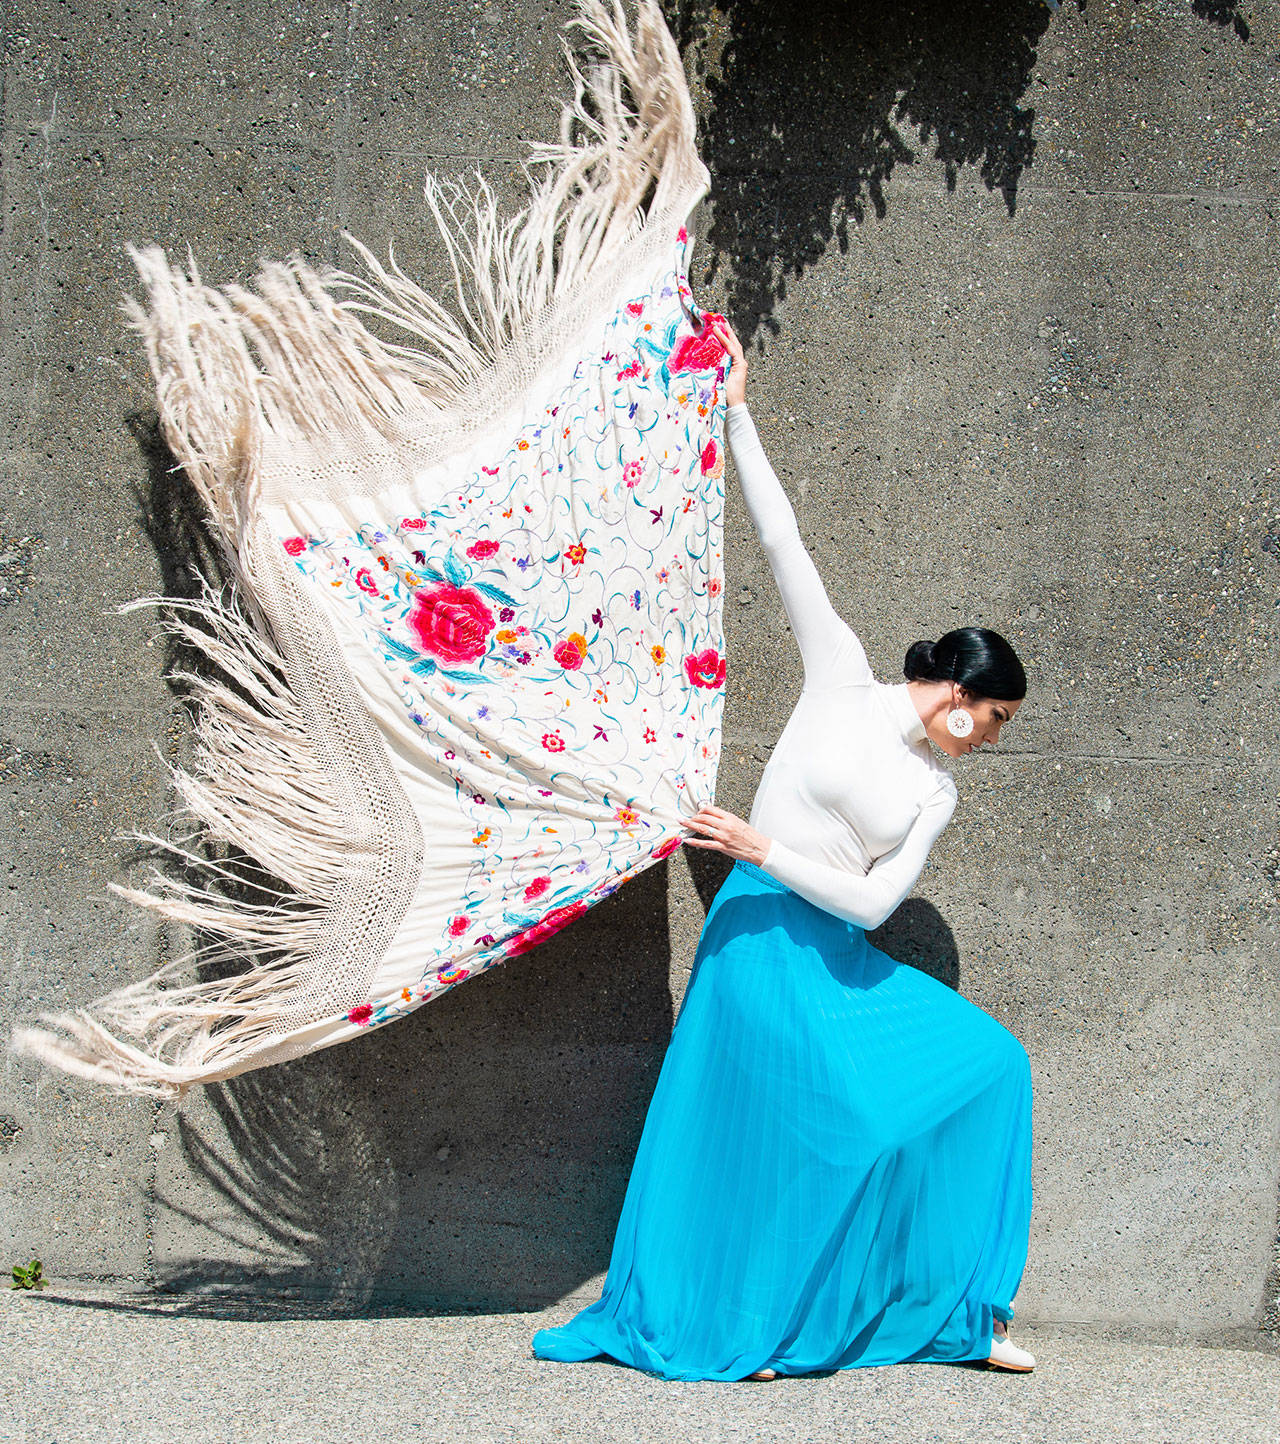 Seattle-based flamenco dancer Savannah Fuentes offers “Flores de Verano Flamenco en Vivo” at the Sequim Prairie Grange on June 16, along with two June dates in Port Townsend this June. Submitted photo